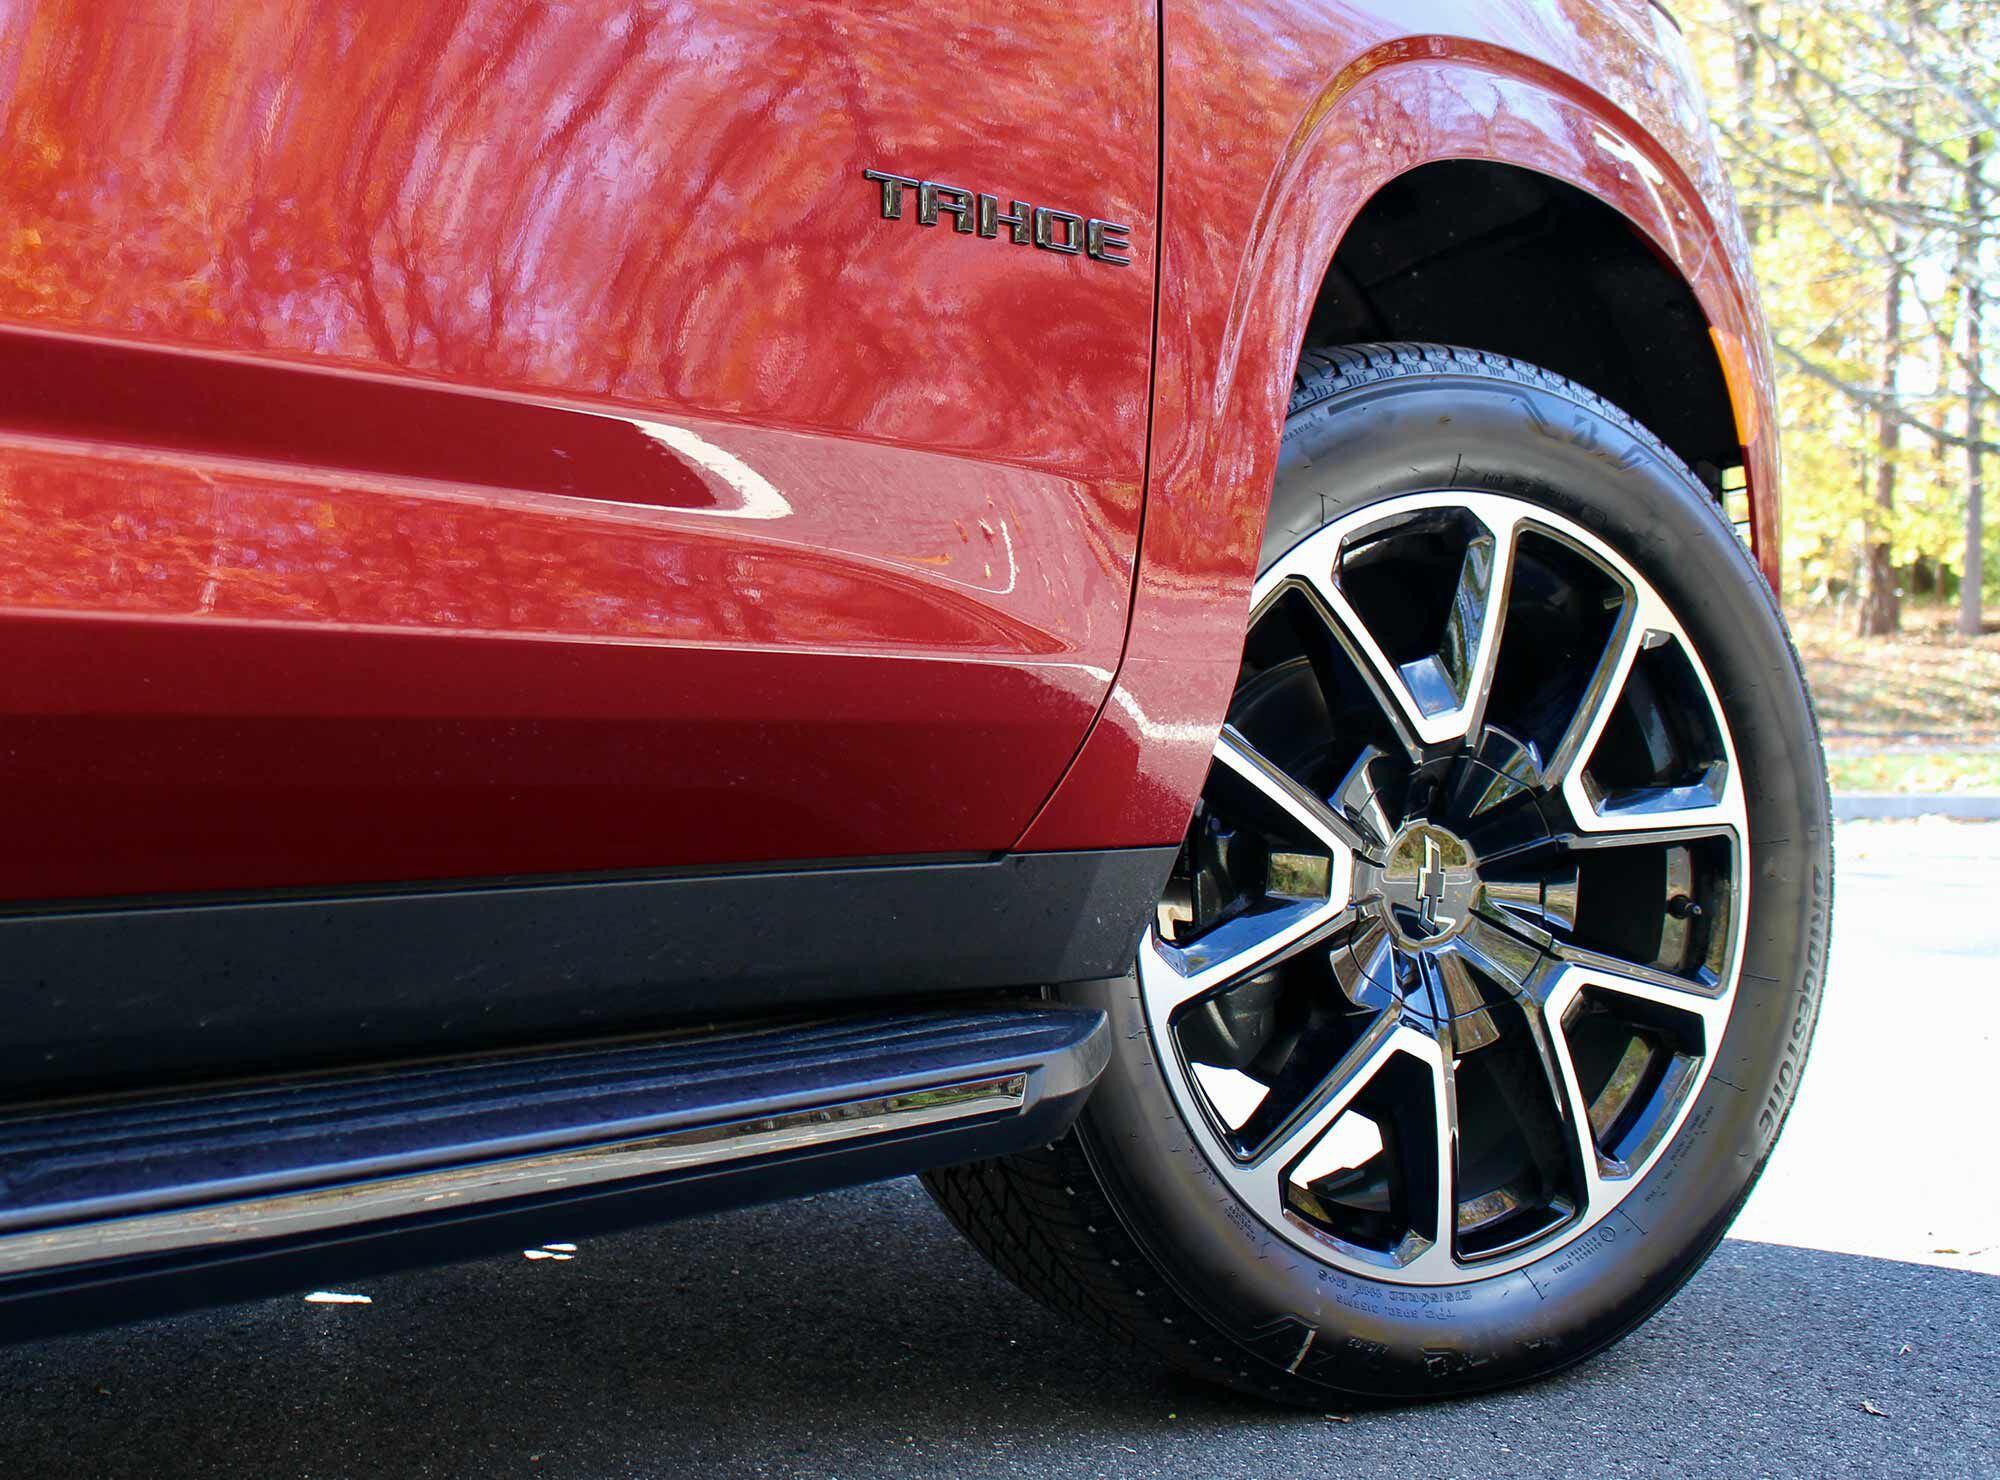 The Tahoe RST has a ton of flair to it, 22-inch wheels and blacked-out badges included.